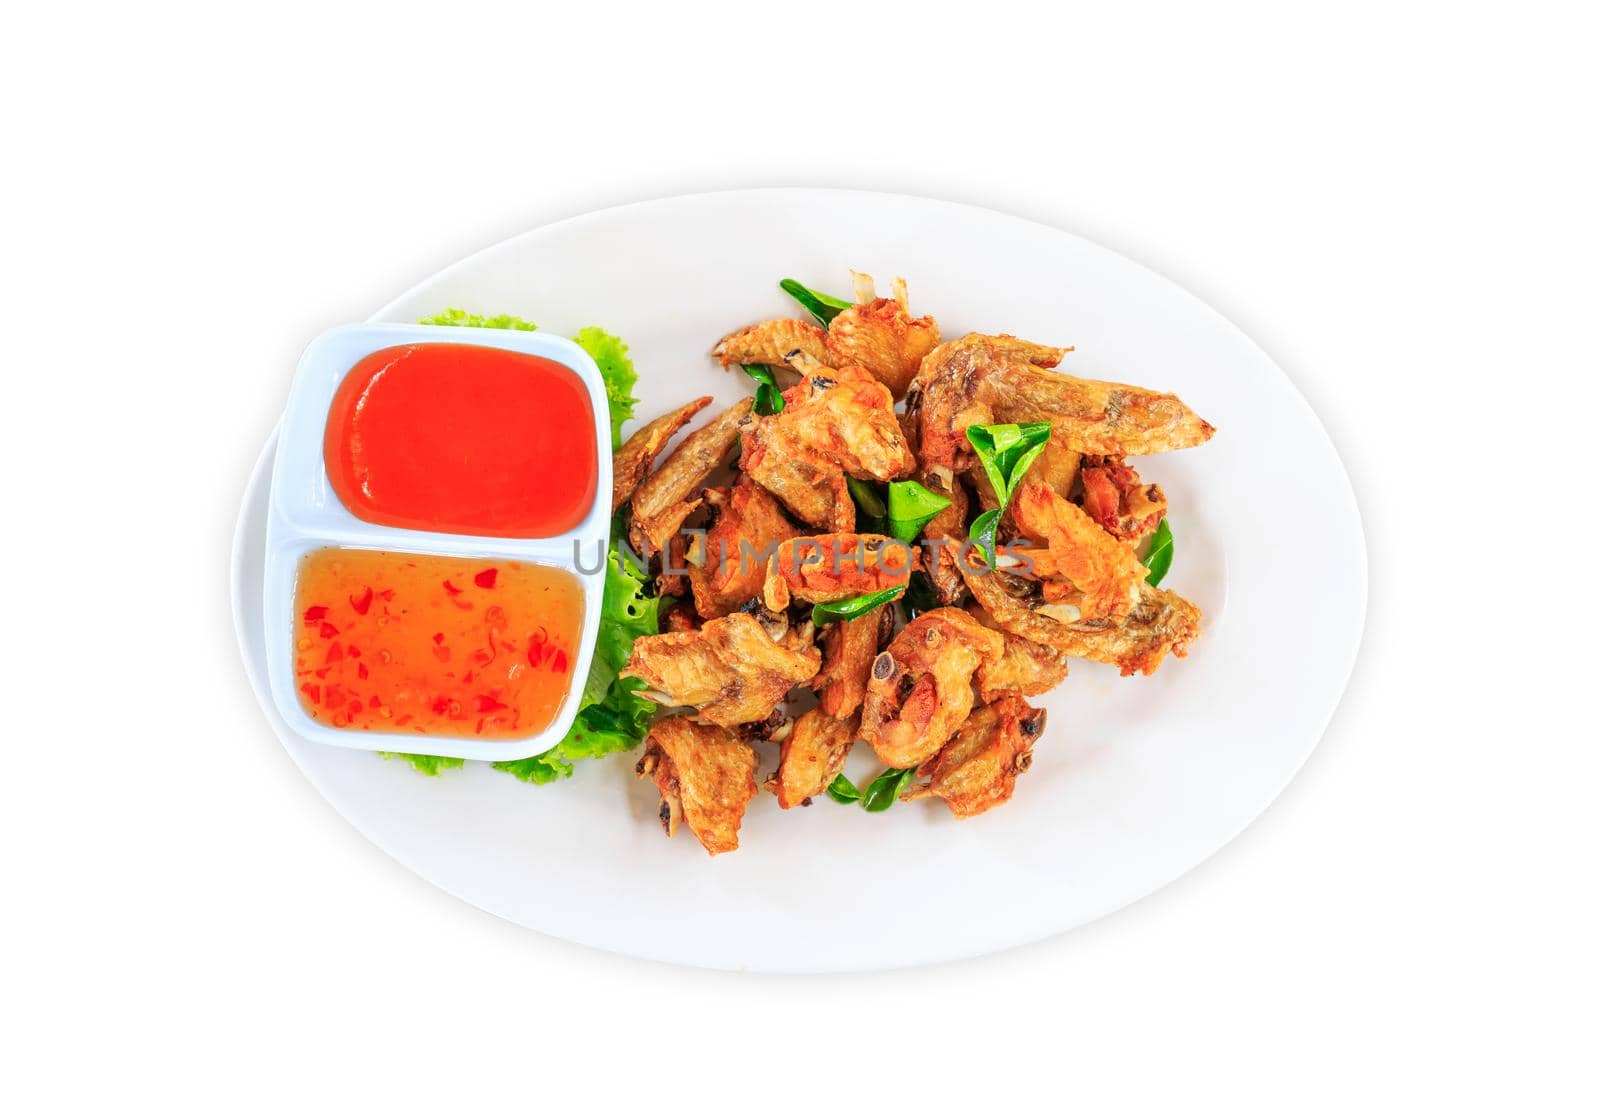 Fried chicken wings with sauce in white plate on white background